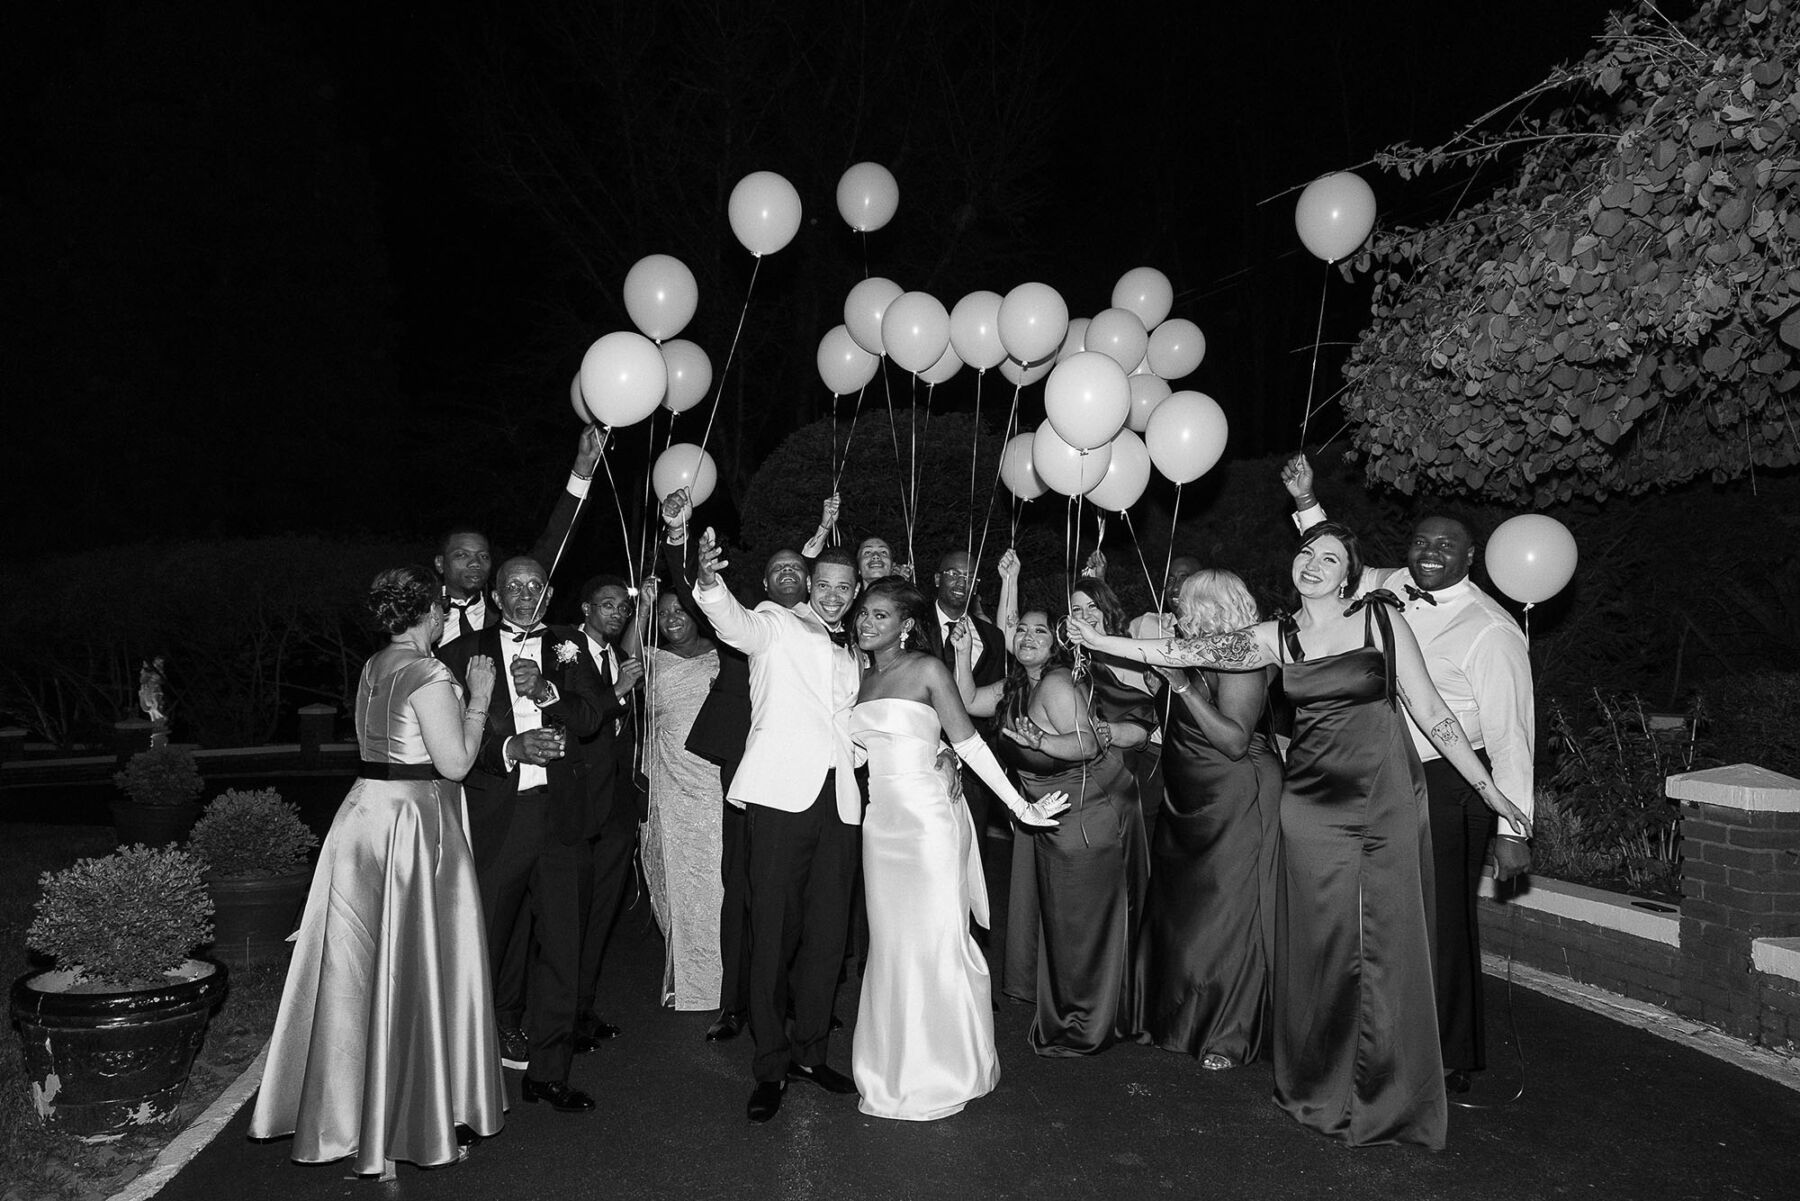 Bride and groom with lots of balloons